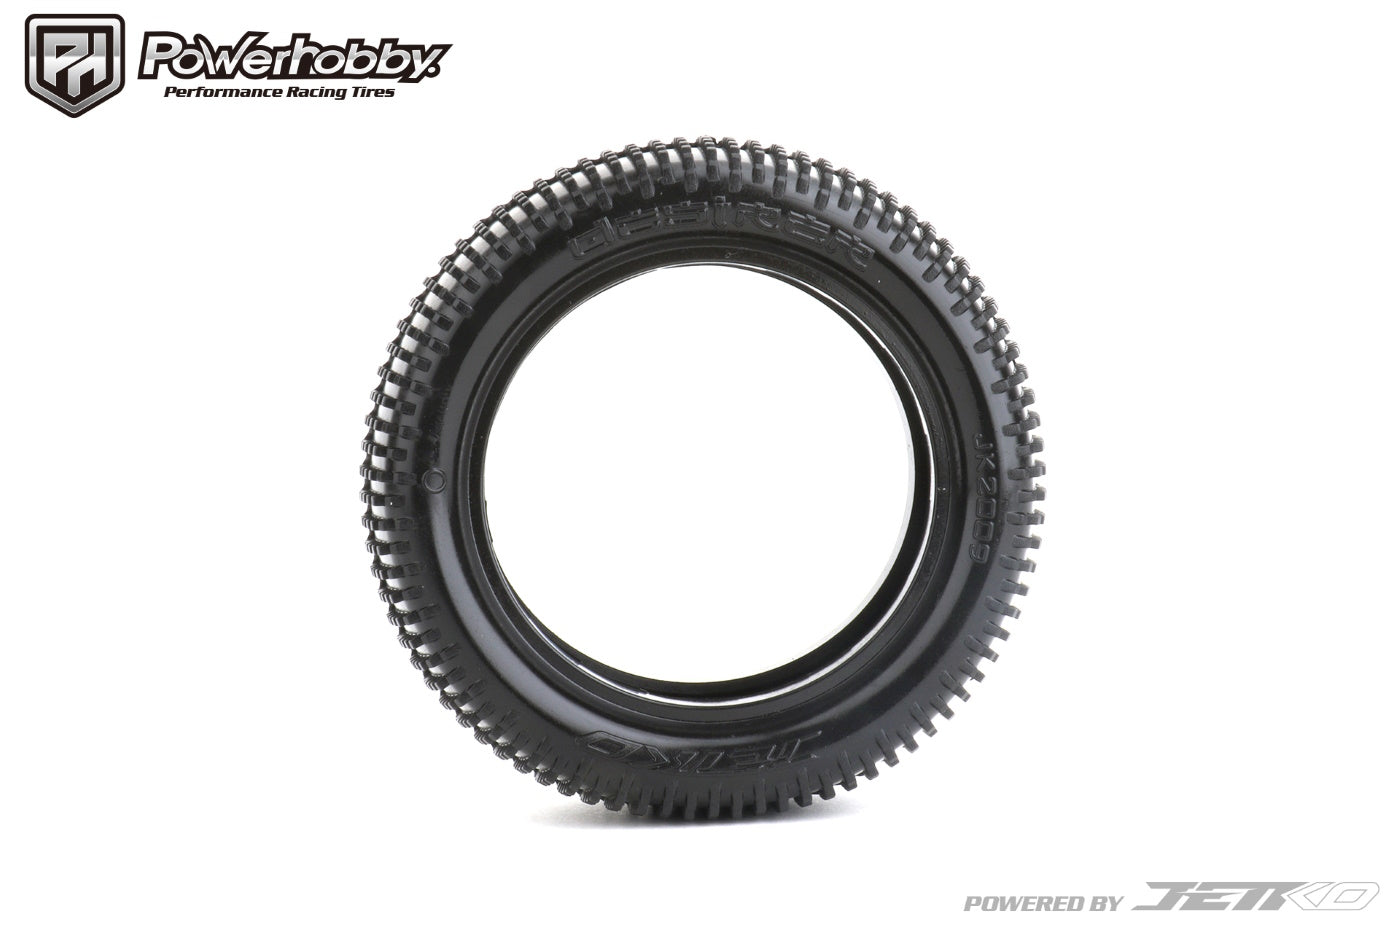 Powerhobby Desirer 1/10 4WD Front Buggy Clay Tires Ultra Soft.